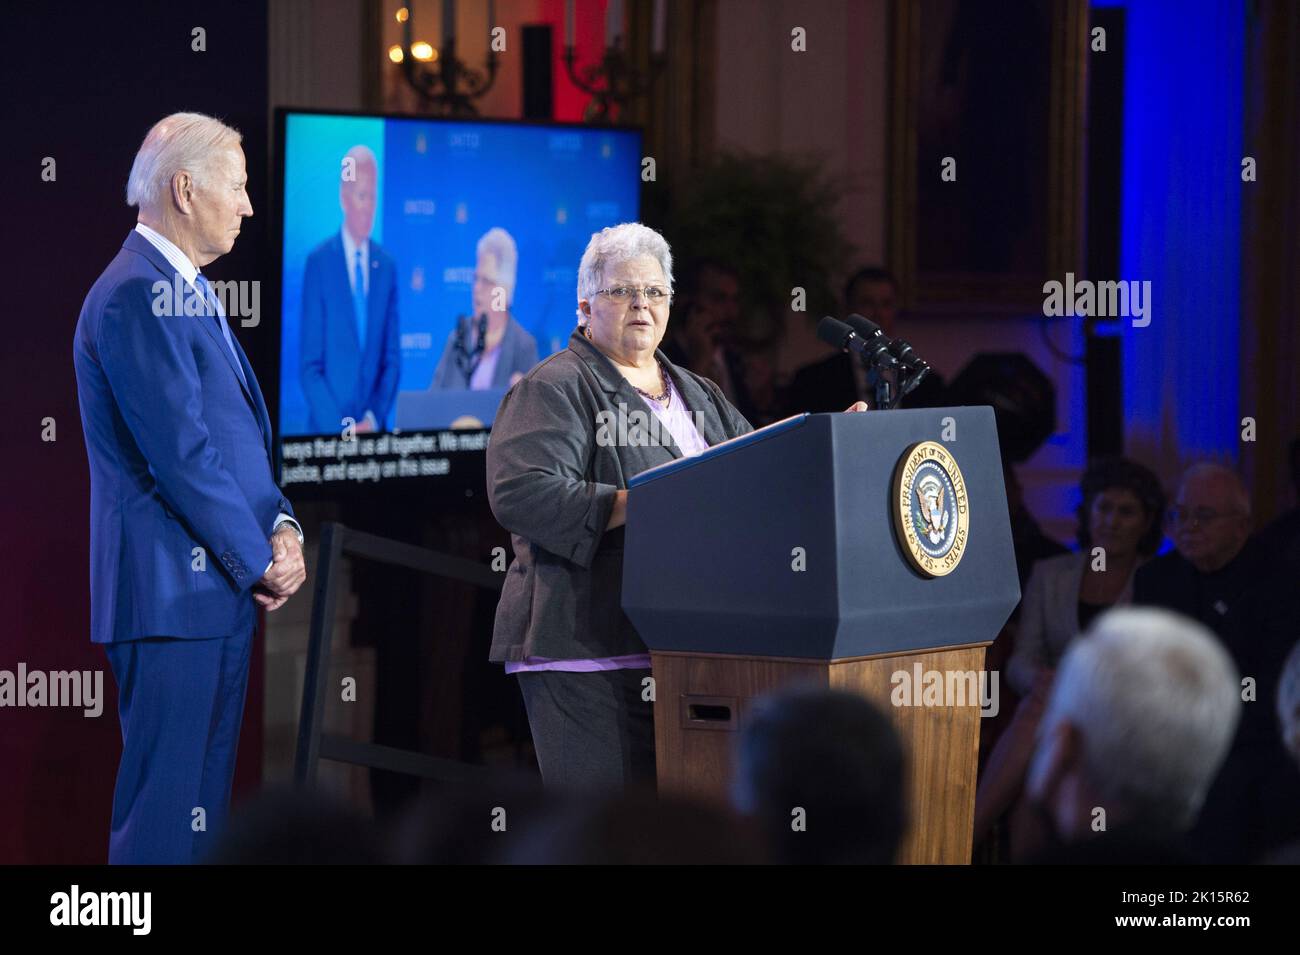 Washington DC, USA. 15th Sep, 2022. President Joe Biden looks on as Susan Bro, mother of Heather Hoyer, speaks during the United We Stand Summit which focused government efforts to combat violence and hate crimes in the East Room at the White House in Washington, DC on Thursday, September 15, 2022. Heather Heyer was killed during the Unite The Right rally in Charlottesville, Virginia in 2017. Photo by Bonnie Cash/UPI Credit: UPI/Alamy Live News Stock Photo